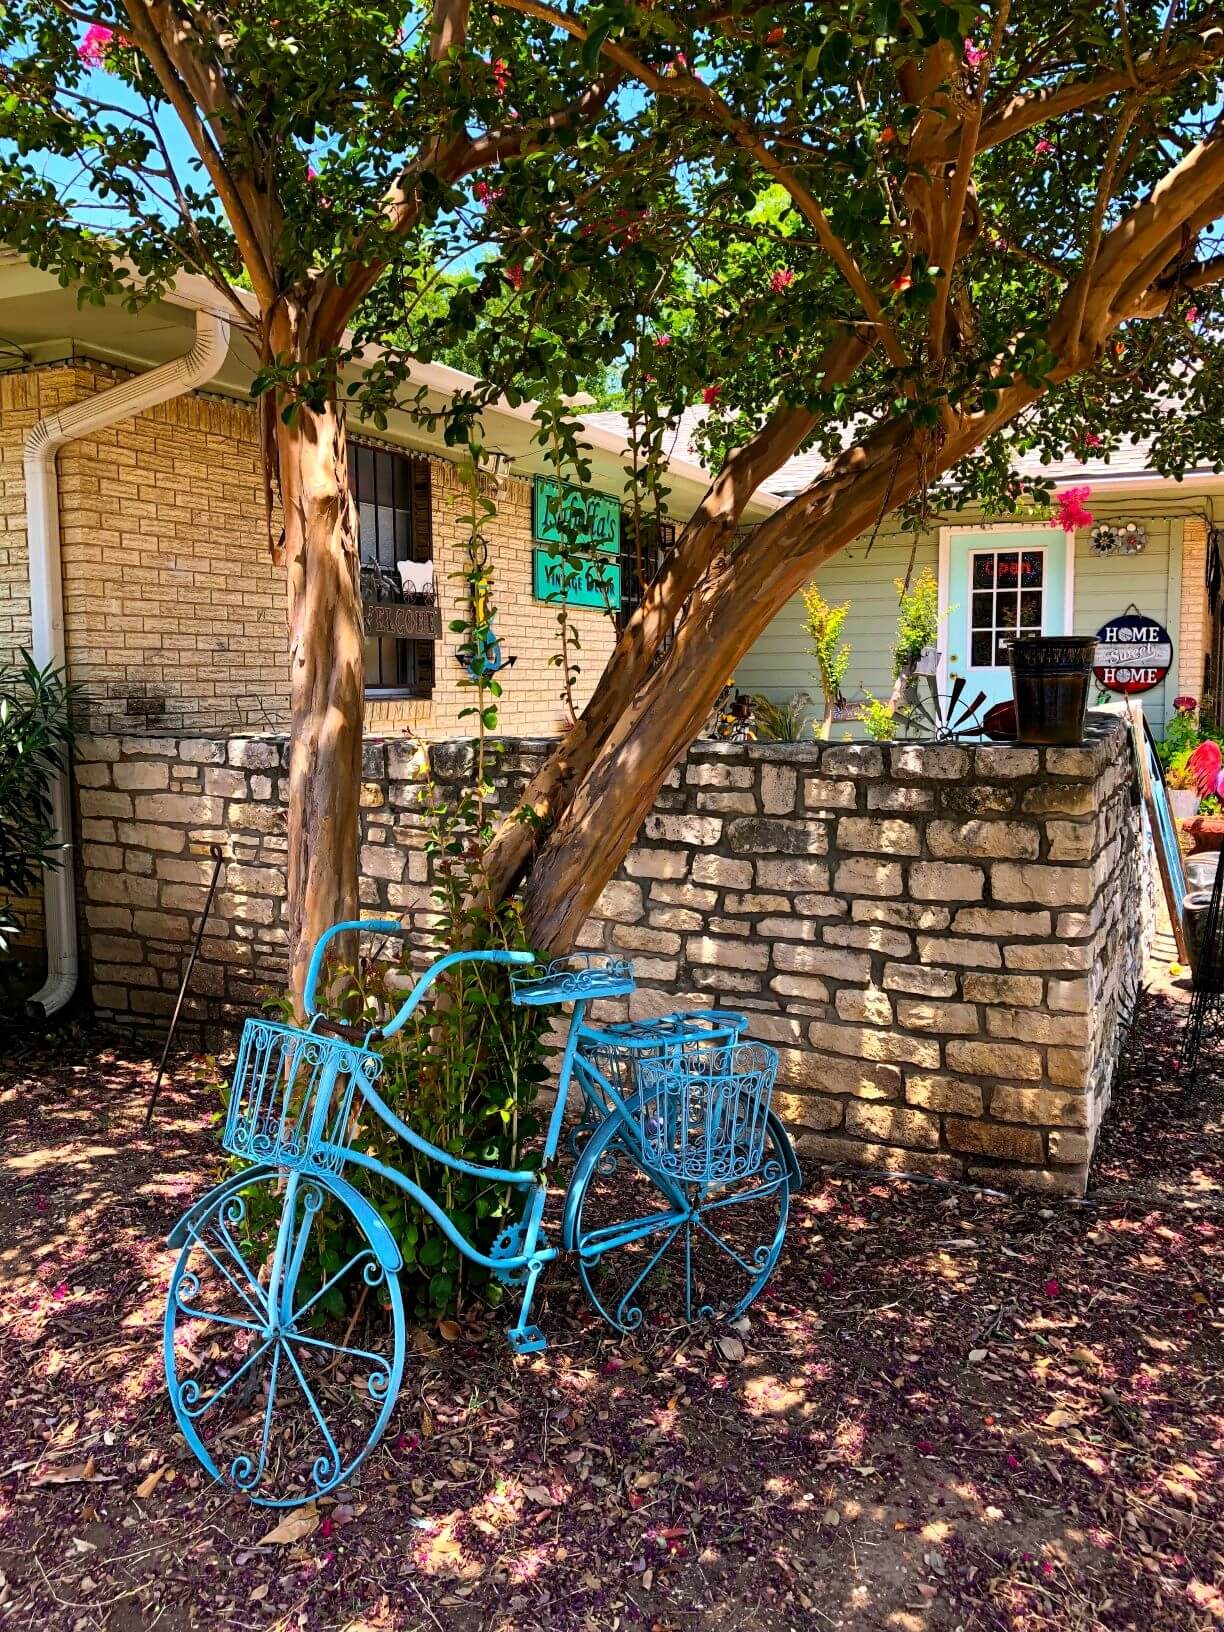 Salado: A blue bicycle rests against a tree is part of the endearing street art in Salado.